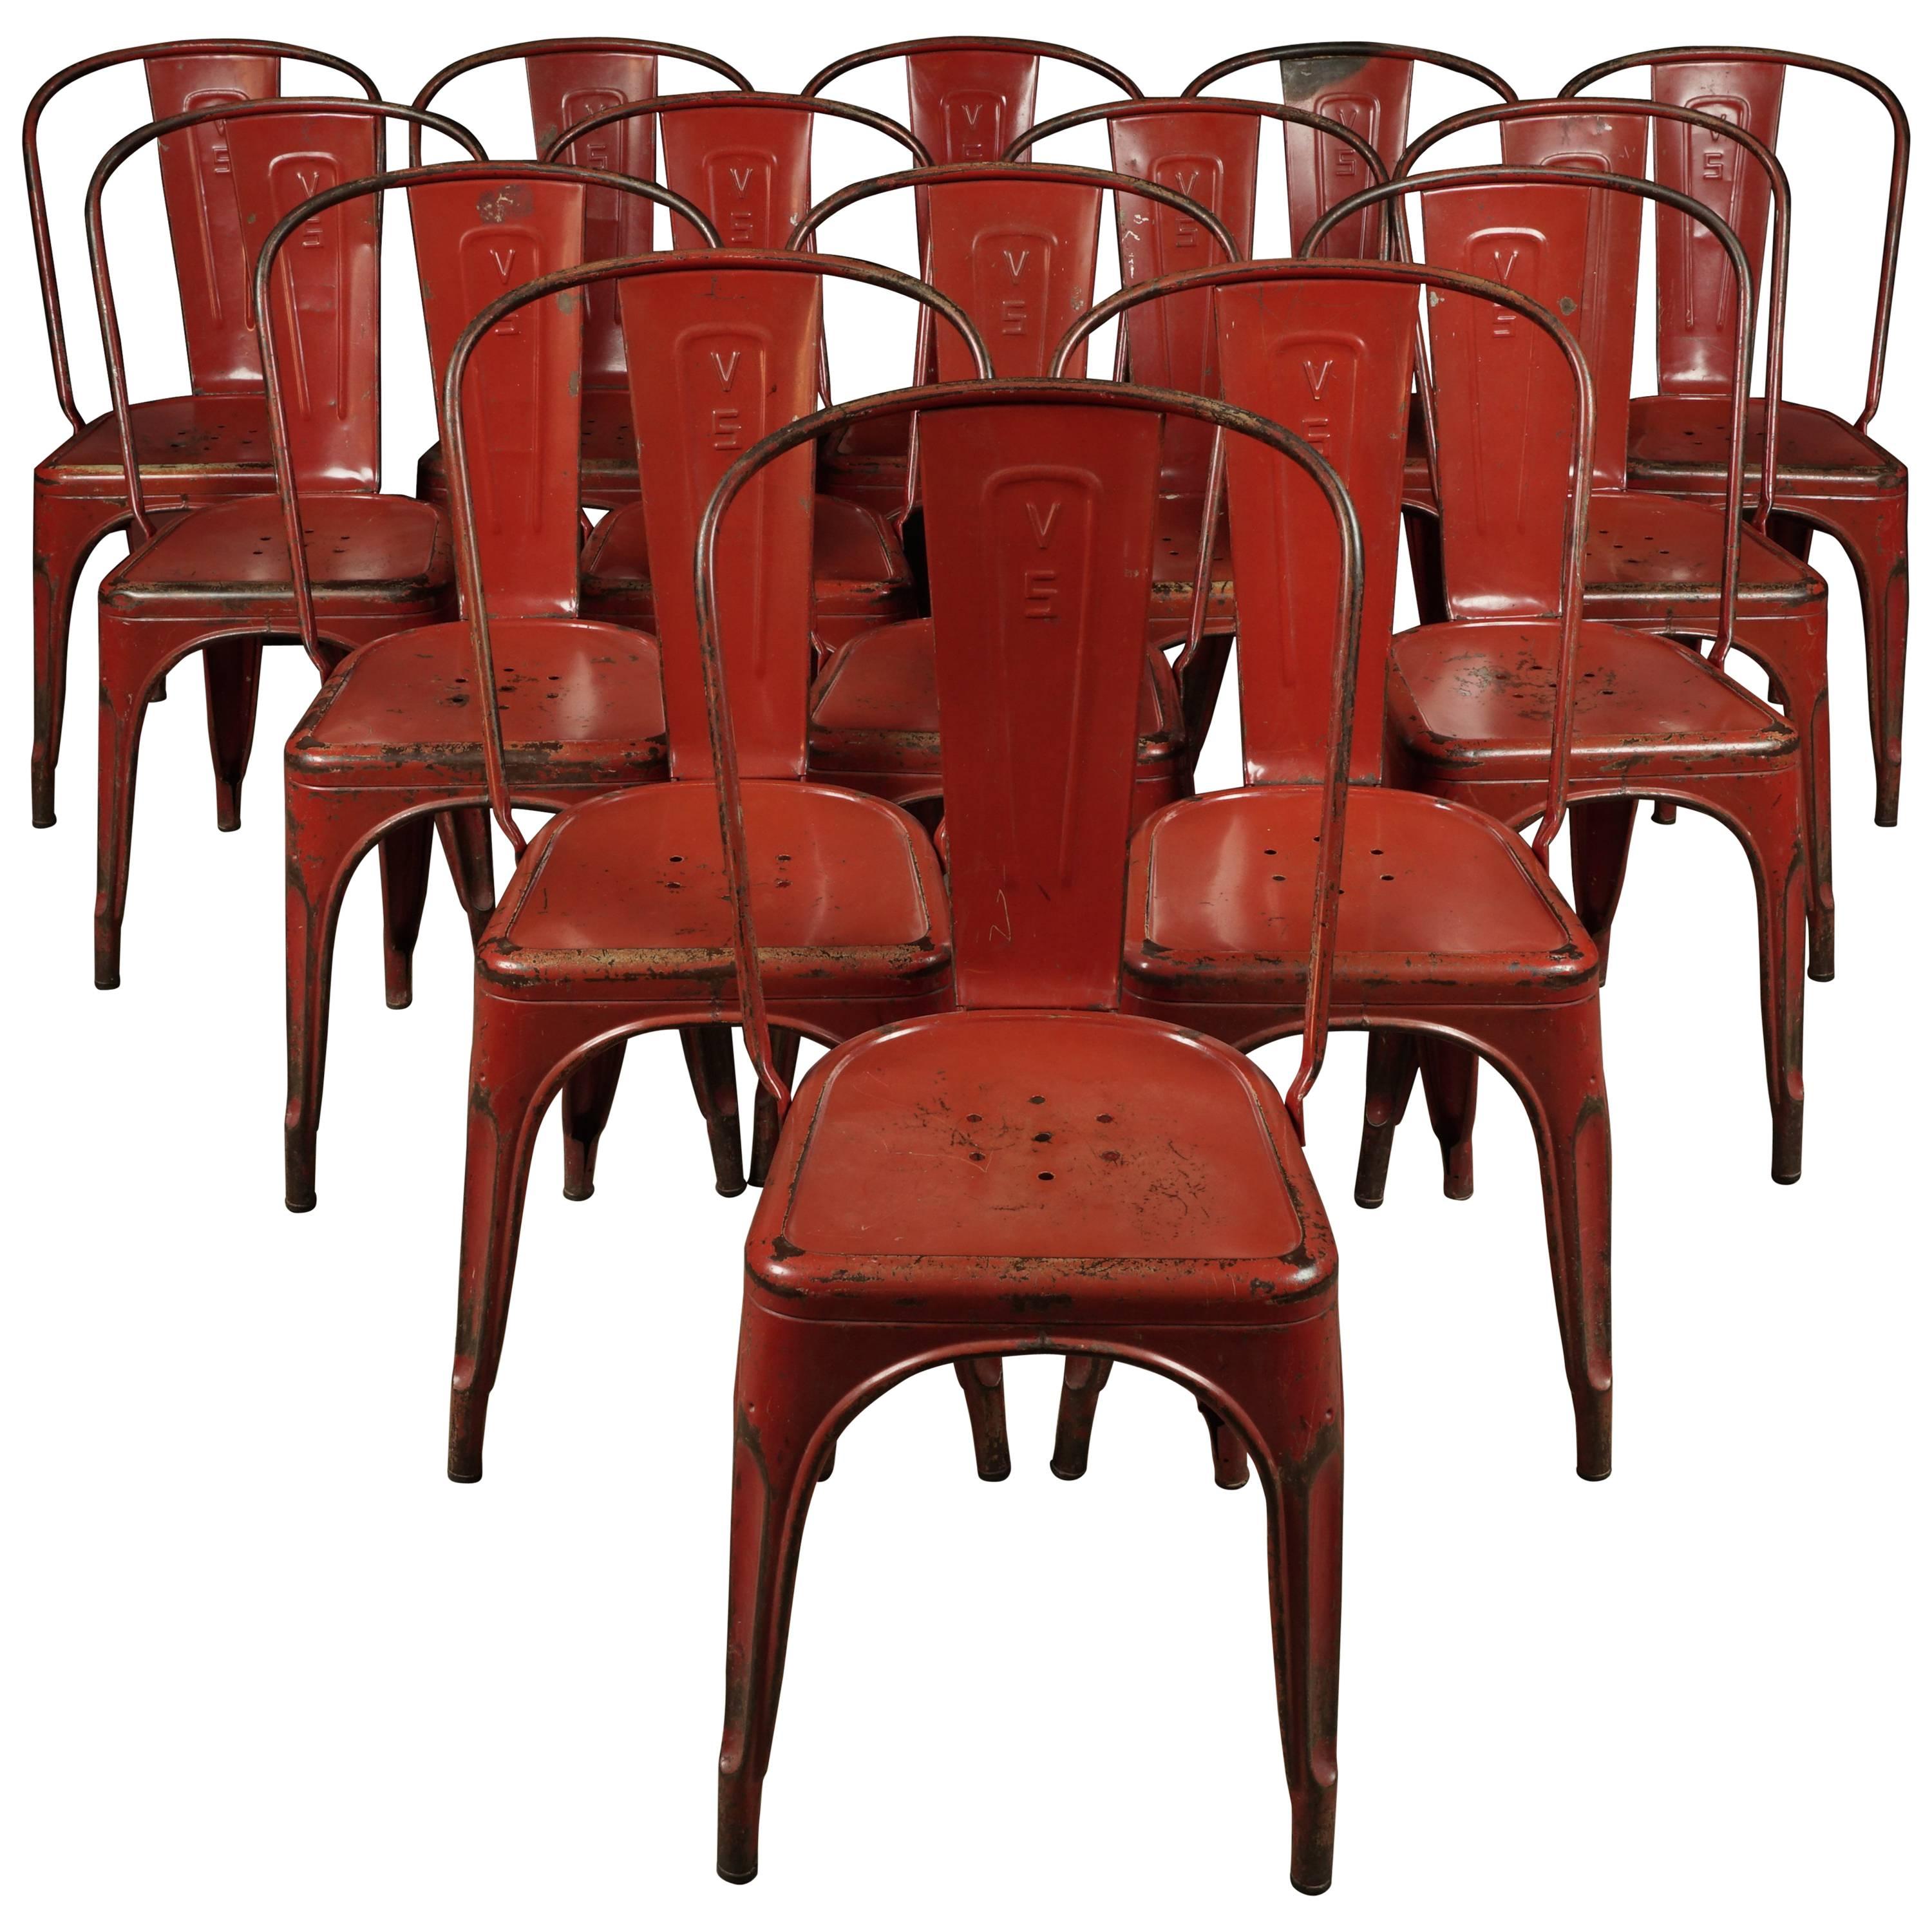 Large Set of 15 Tolix "Model A" Chairs, Designed by Xavier Pauchard, France